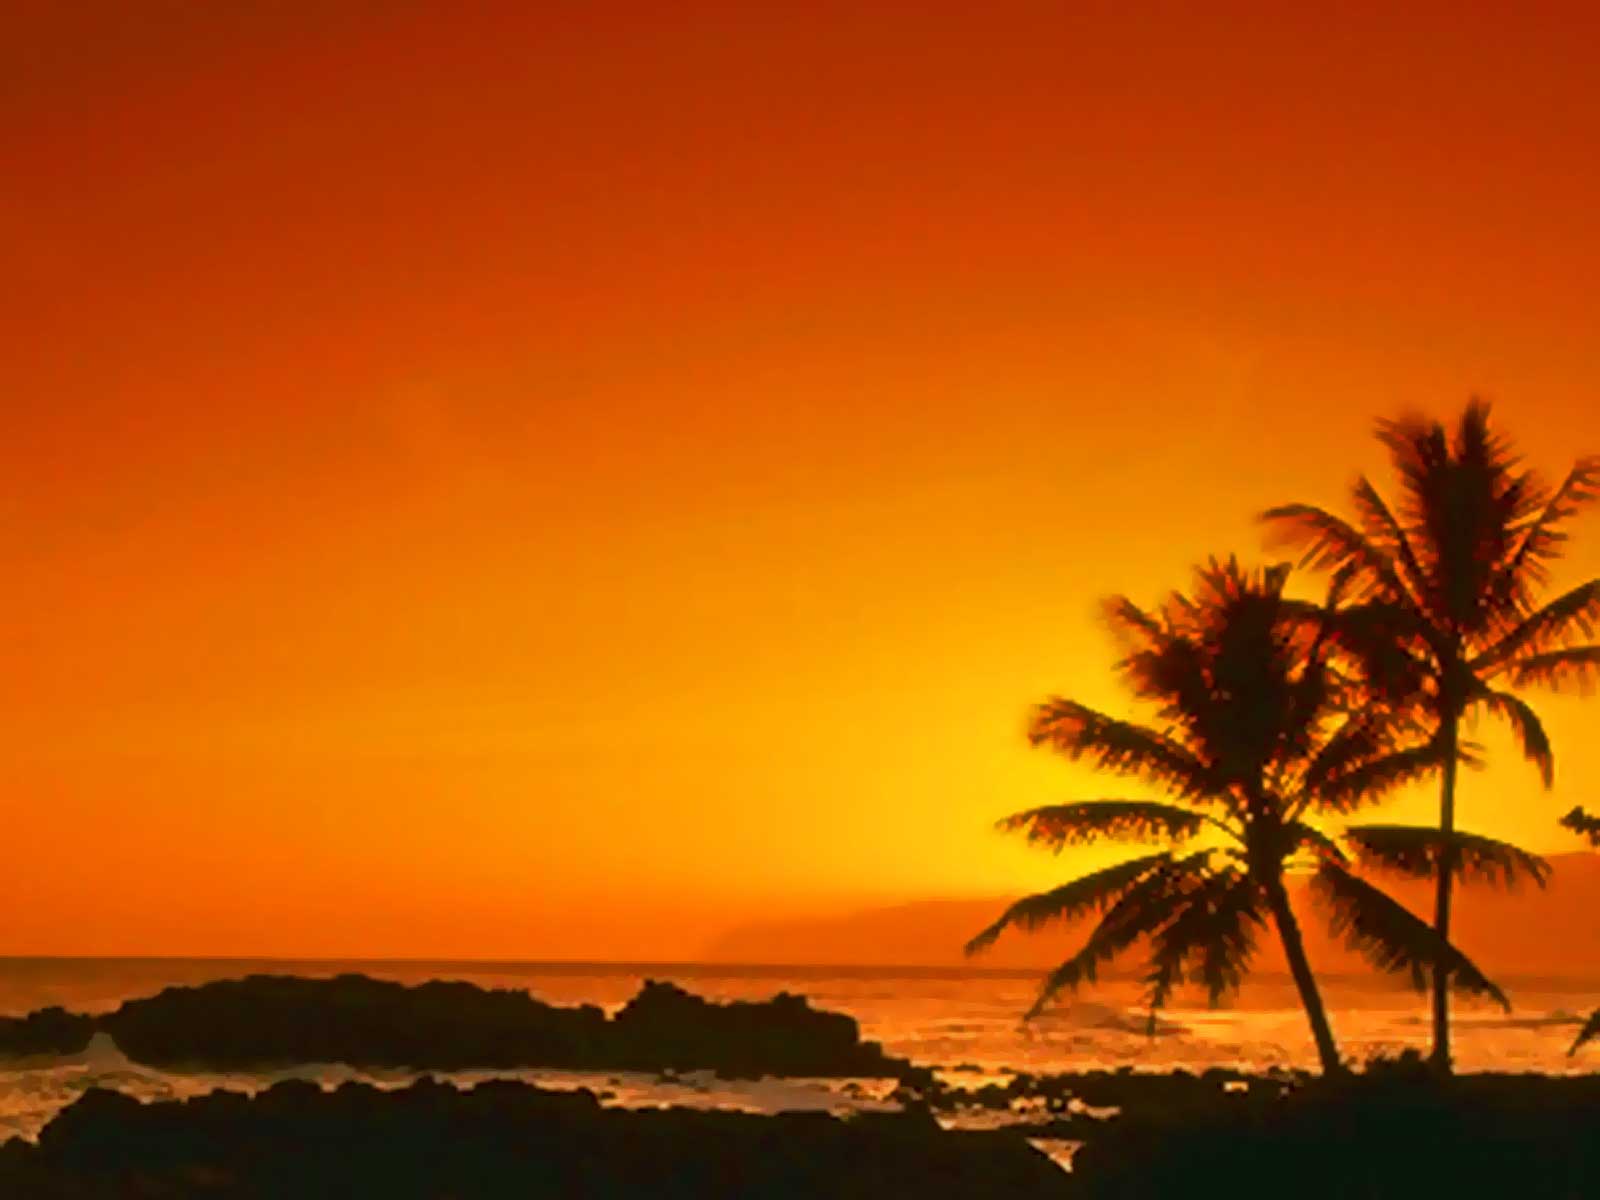 Sunset On The Beach 10150 Hd Wallpapers in Beach   Imagescicom